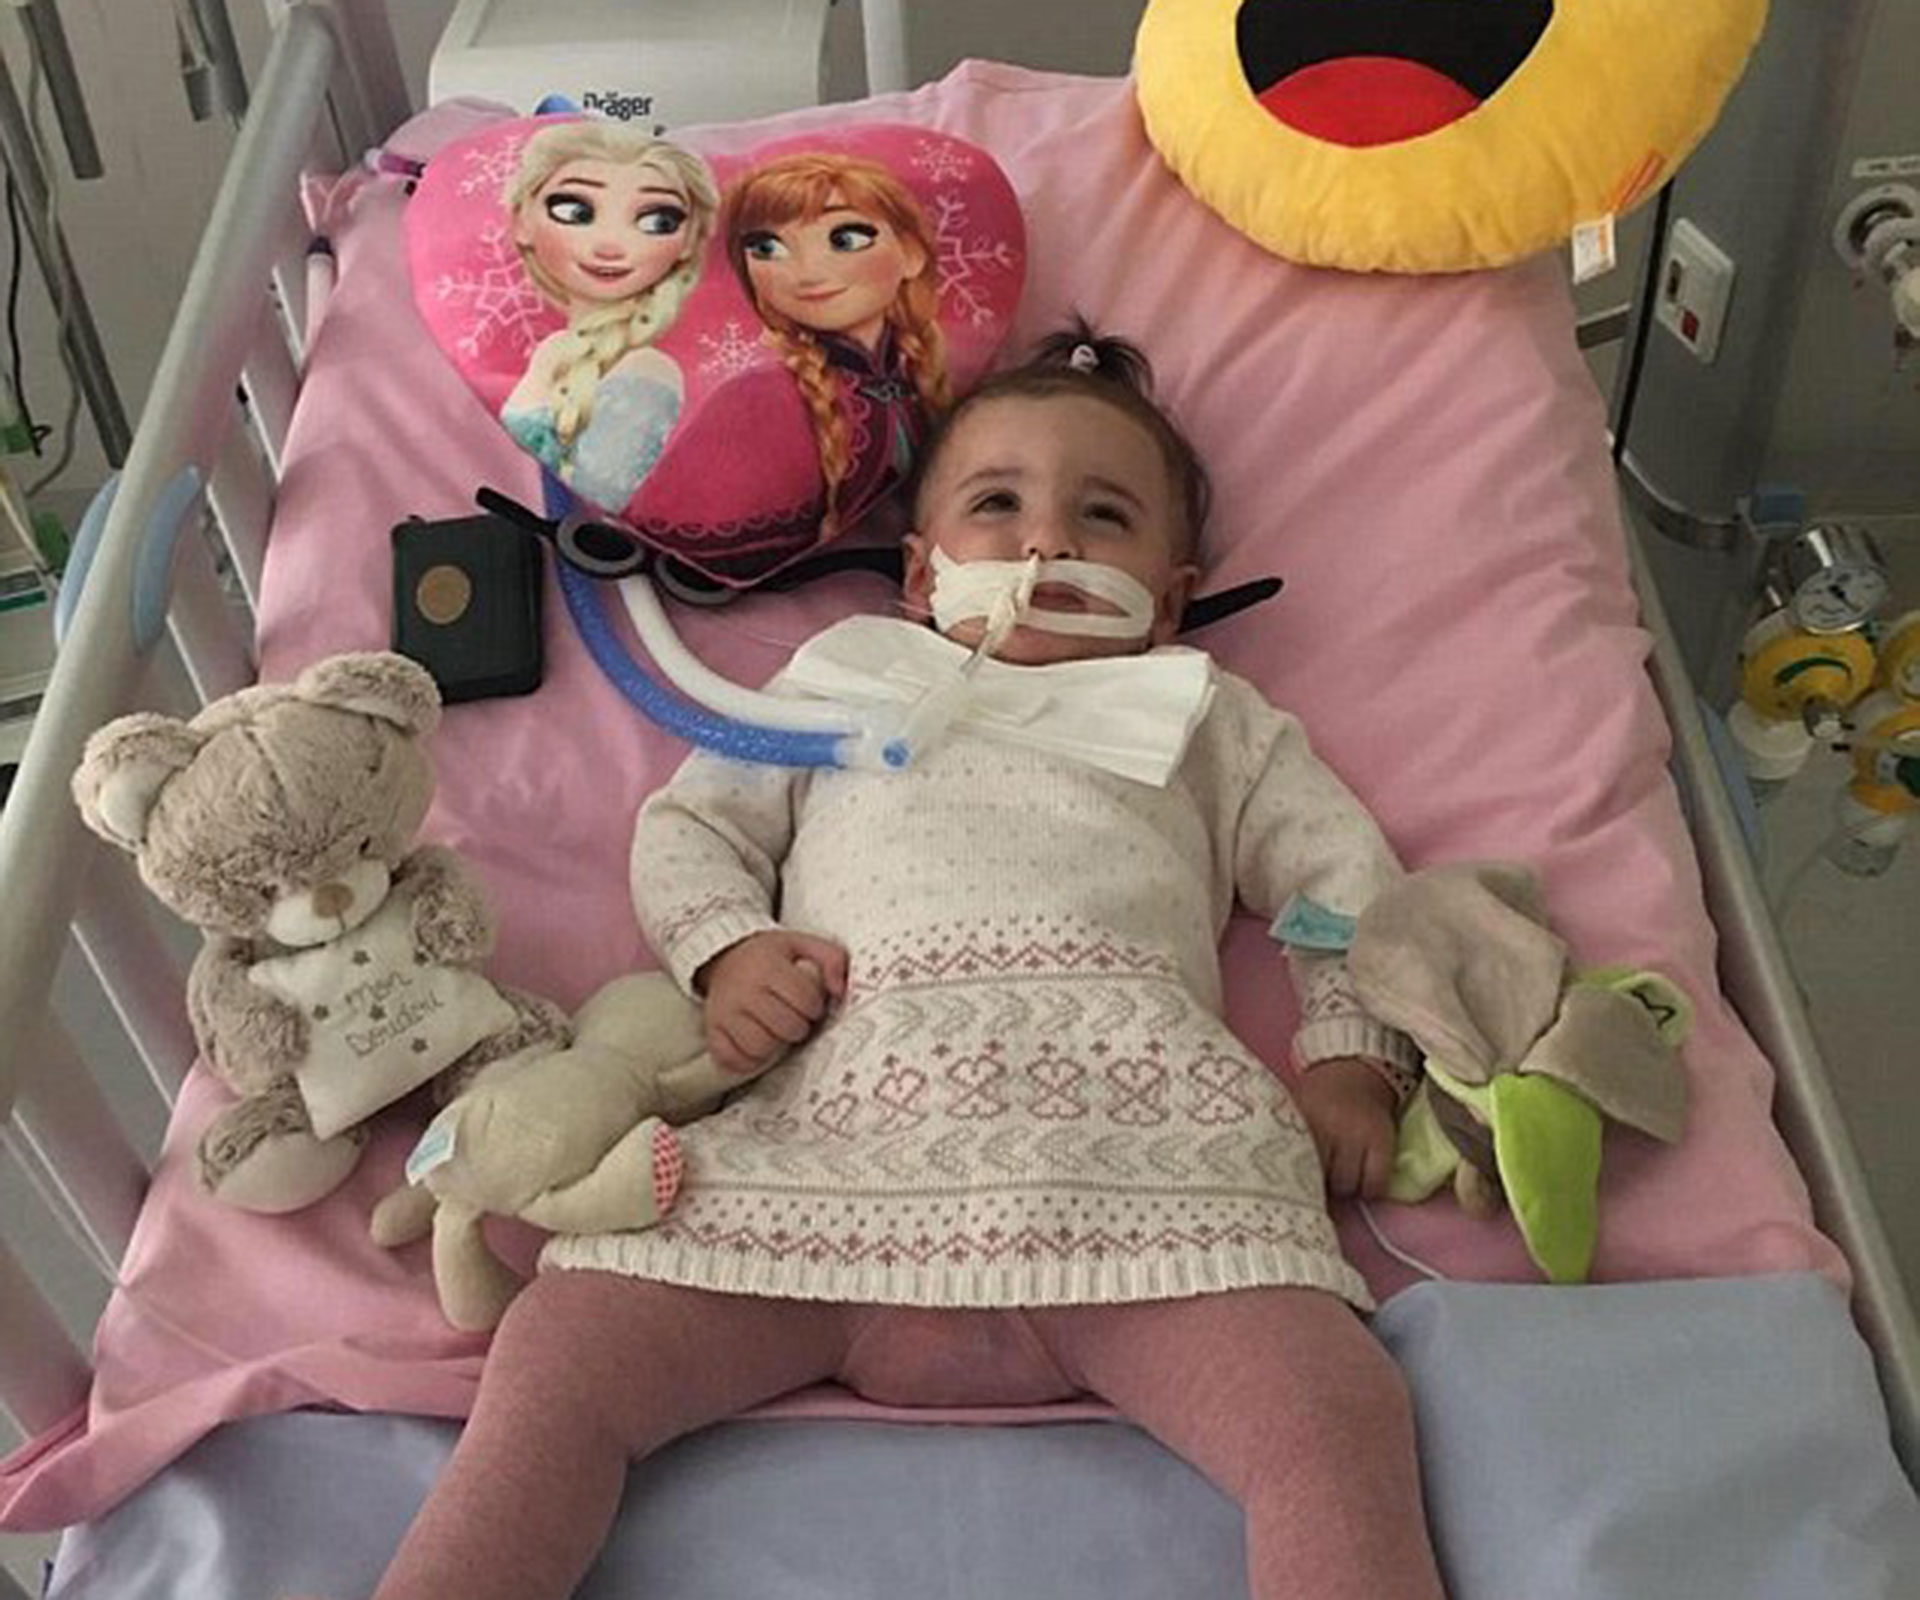 Baby girl defies odds and wakes from a coma after family fought attempts to switch off life support